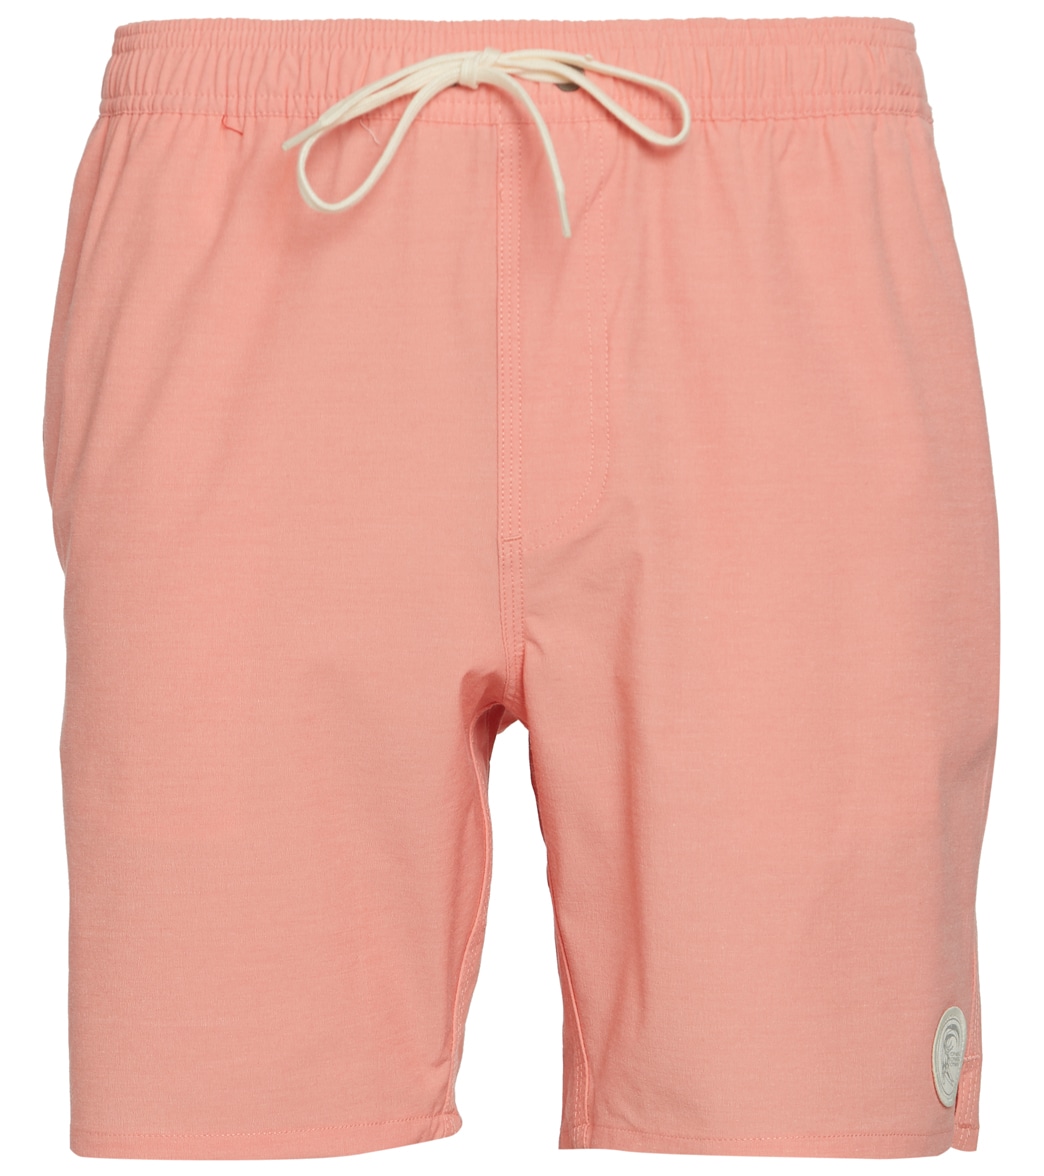 O'neill Men's 17 Solid Volley Short - Hot Coral Medium Polyester - Swimoutlet.com